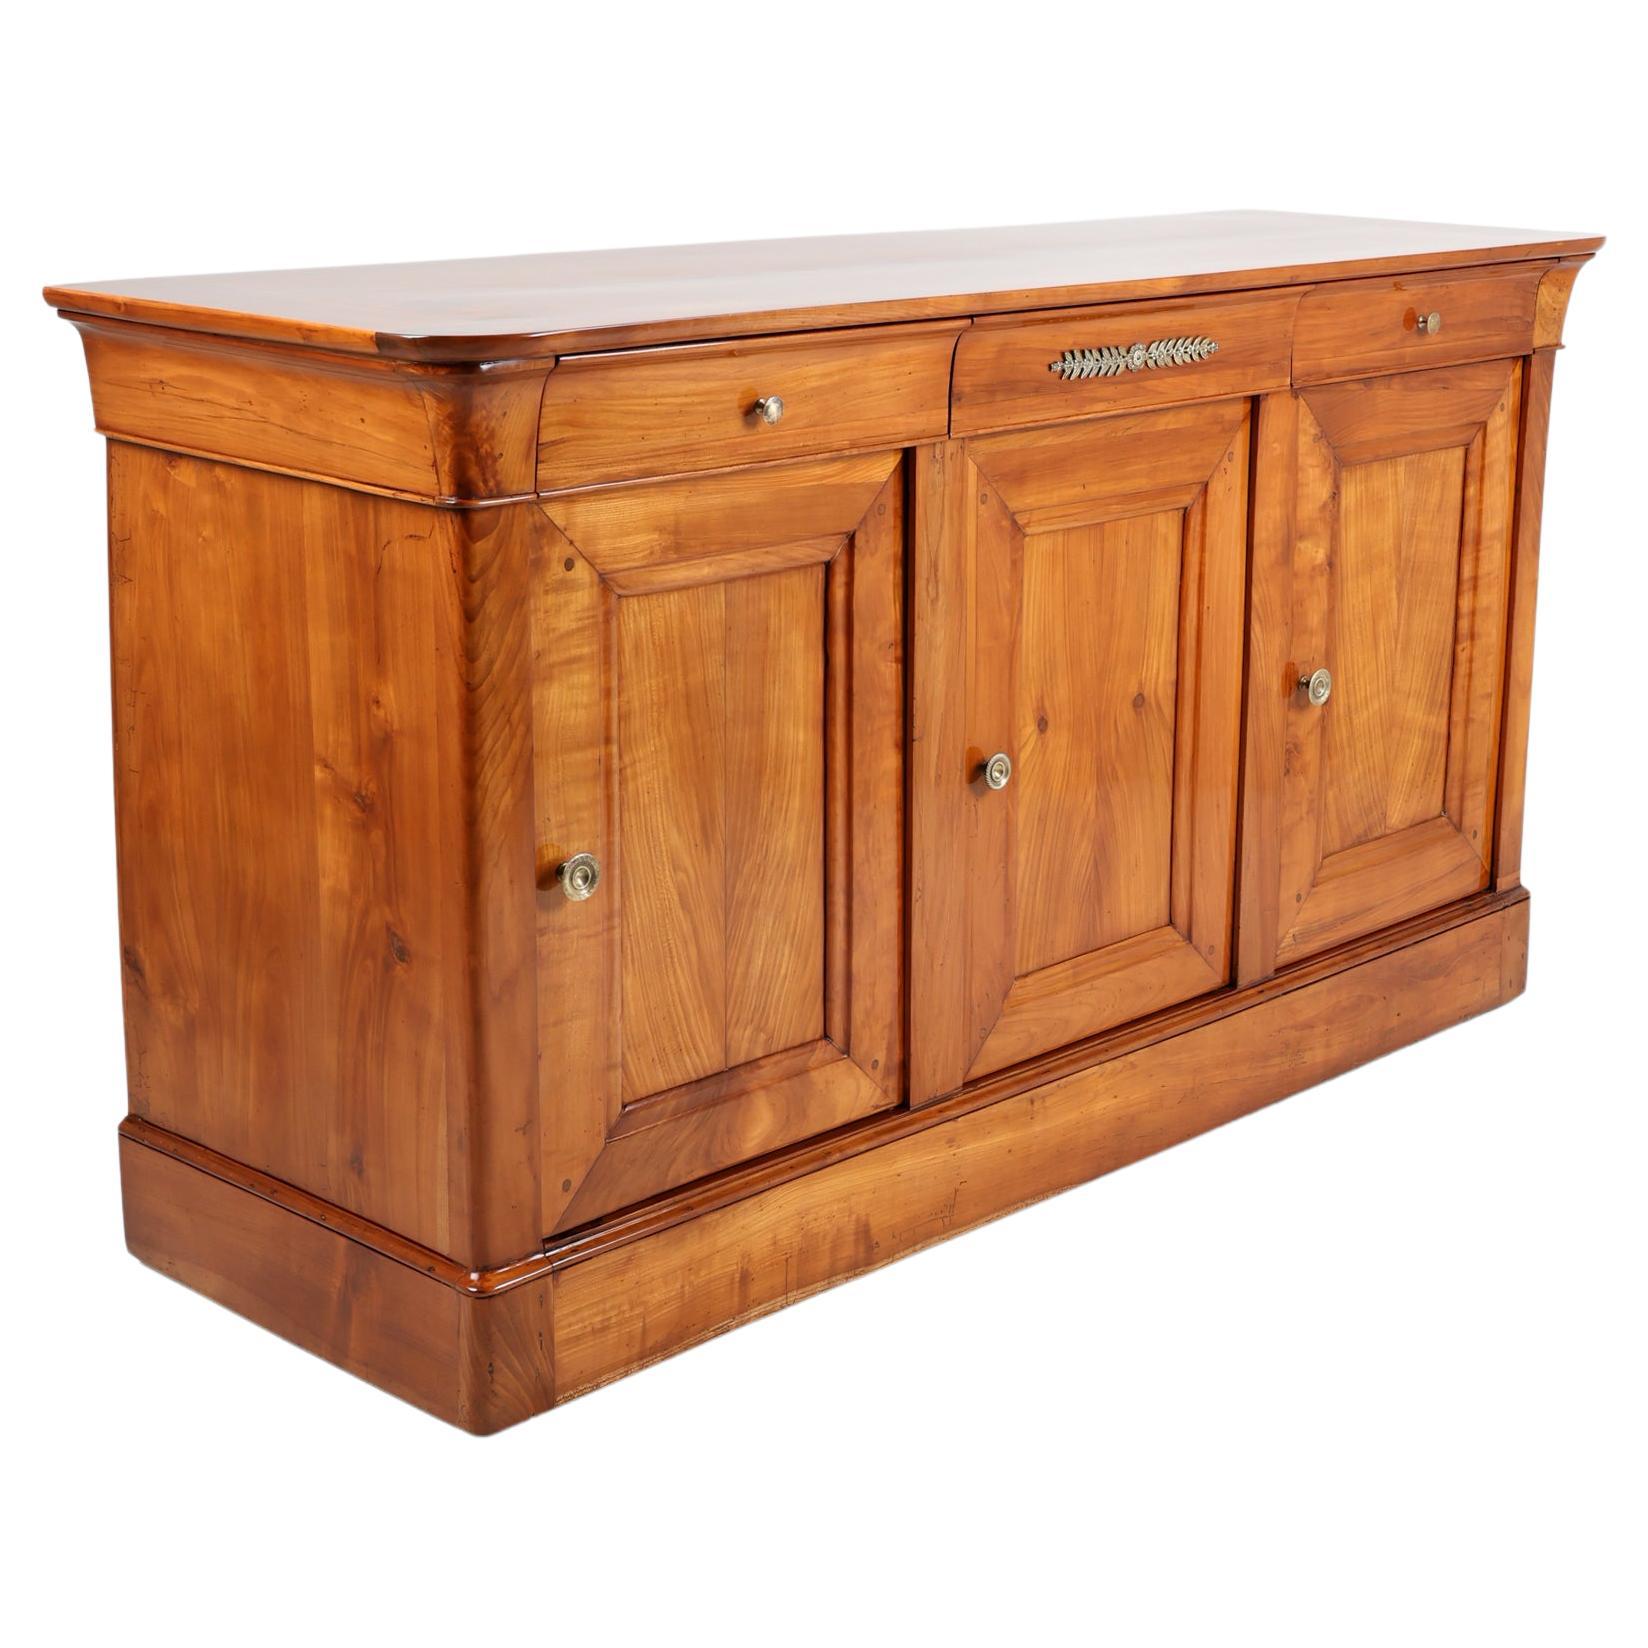 19th Century Empire Period Sideboard or Buffet
France, 1830
Cherrywood,

This early nineteenth century French Buffet is constructed of solid Cherrywood. Three drawers of dovetail construction fit into the apron and are appointed with bronze drawer